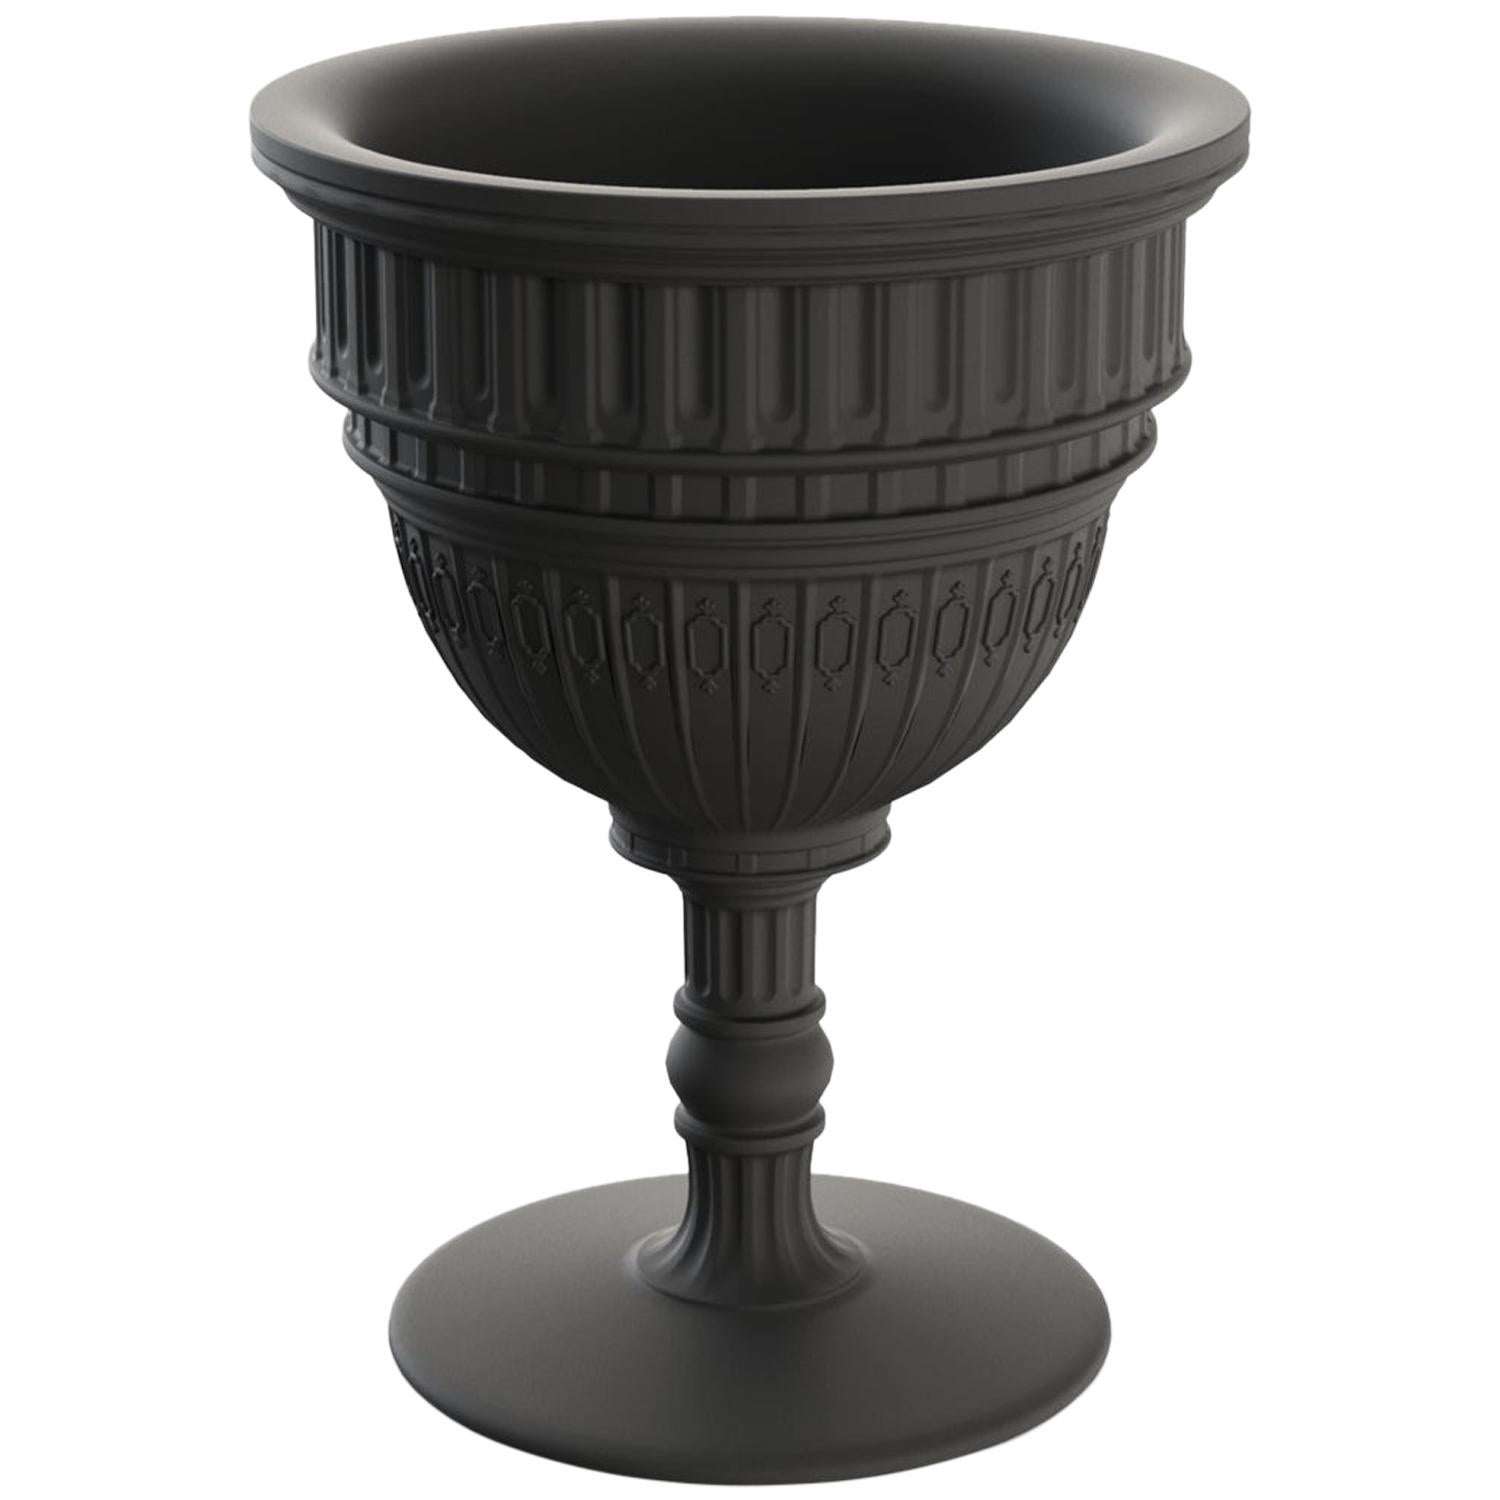 Black Capitol Planter / Champagne Cooler, Designed by Studio Job, Made in Italy For Sale